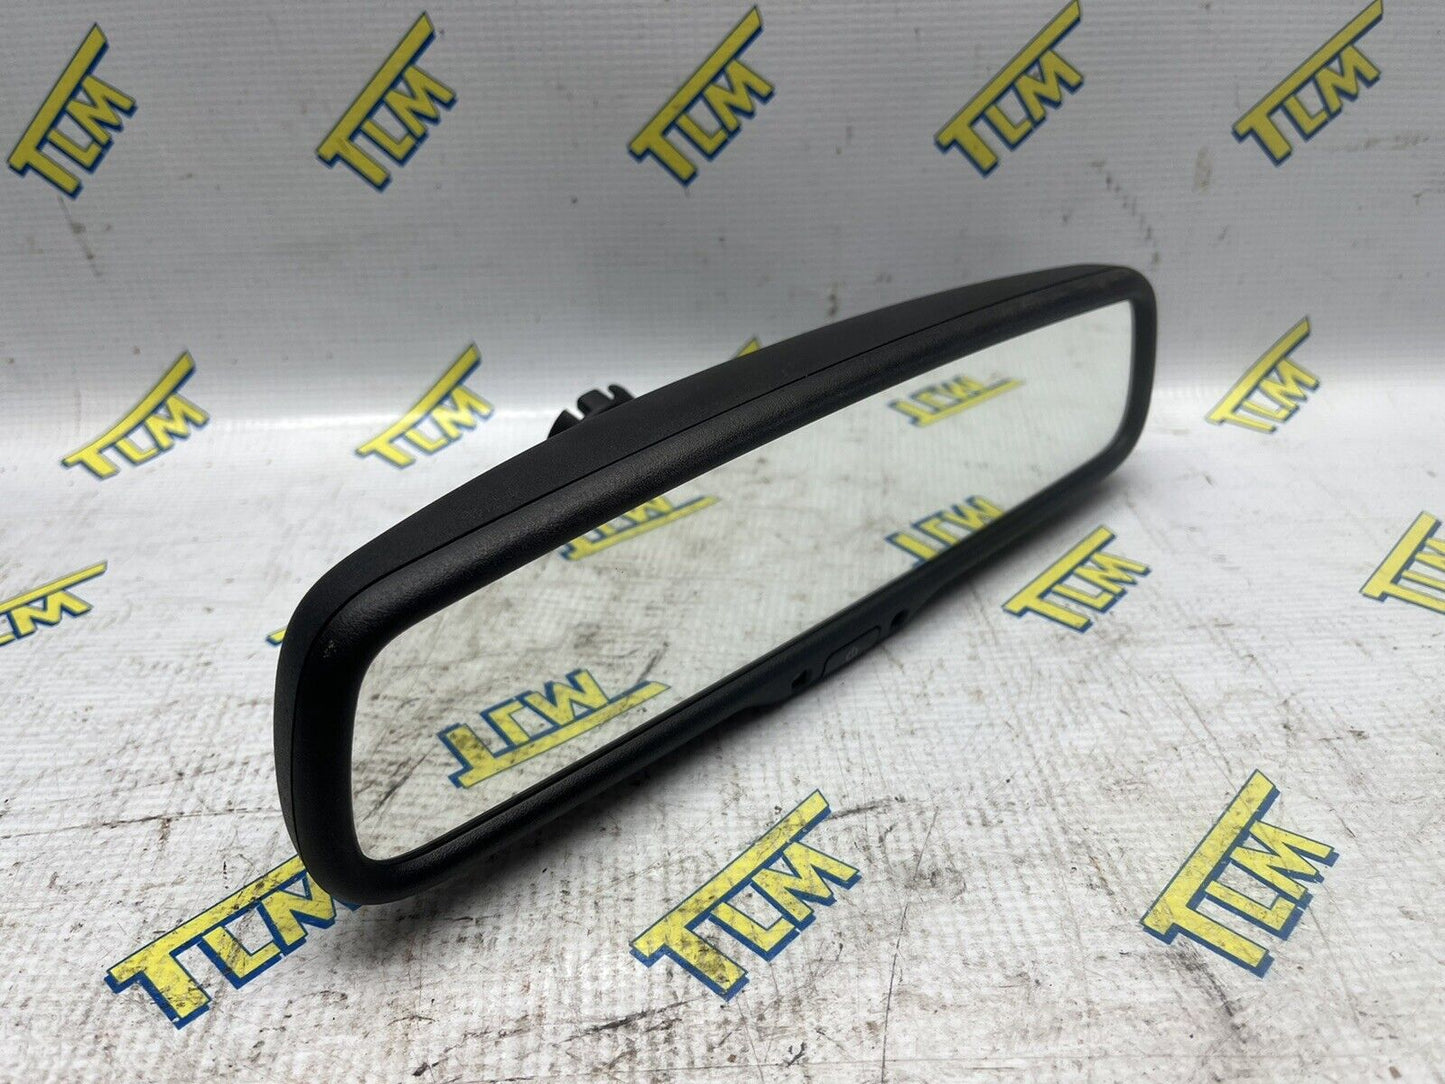 Acura TSX Rear View Interior Mirror 2004 2005 2006 2007 2008 Rearview OEM